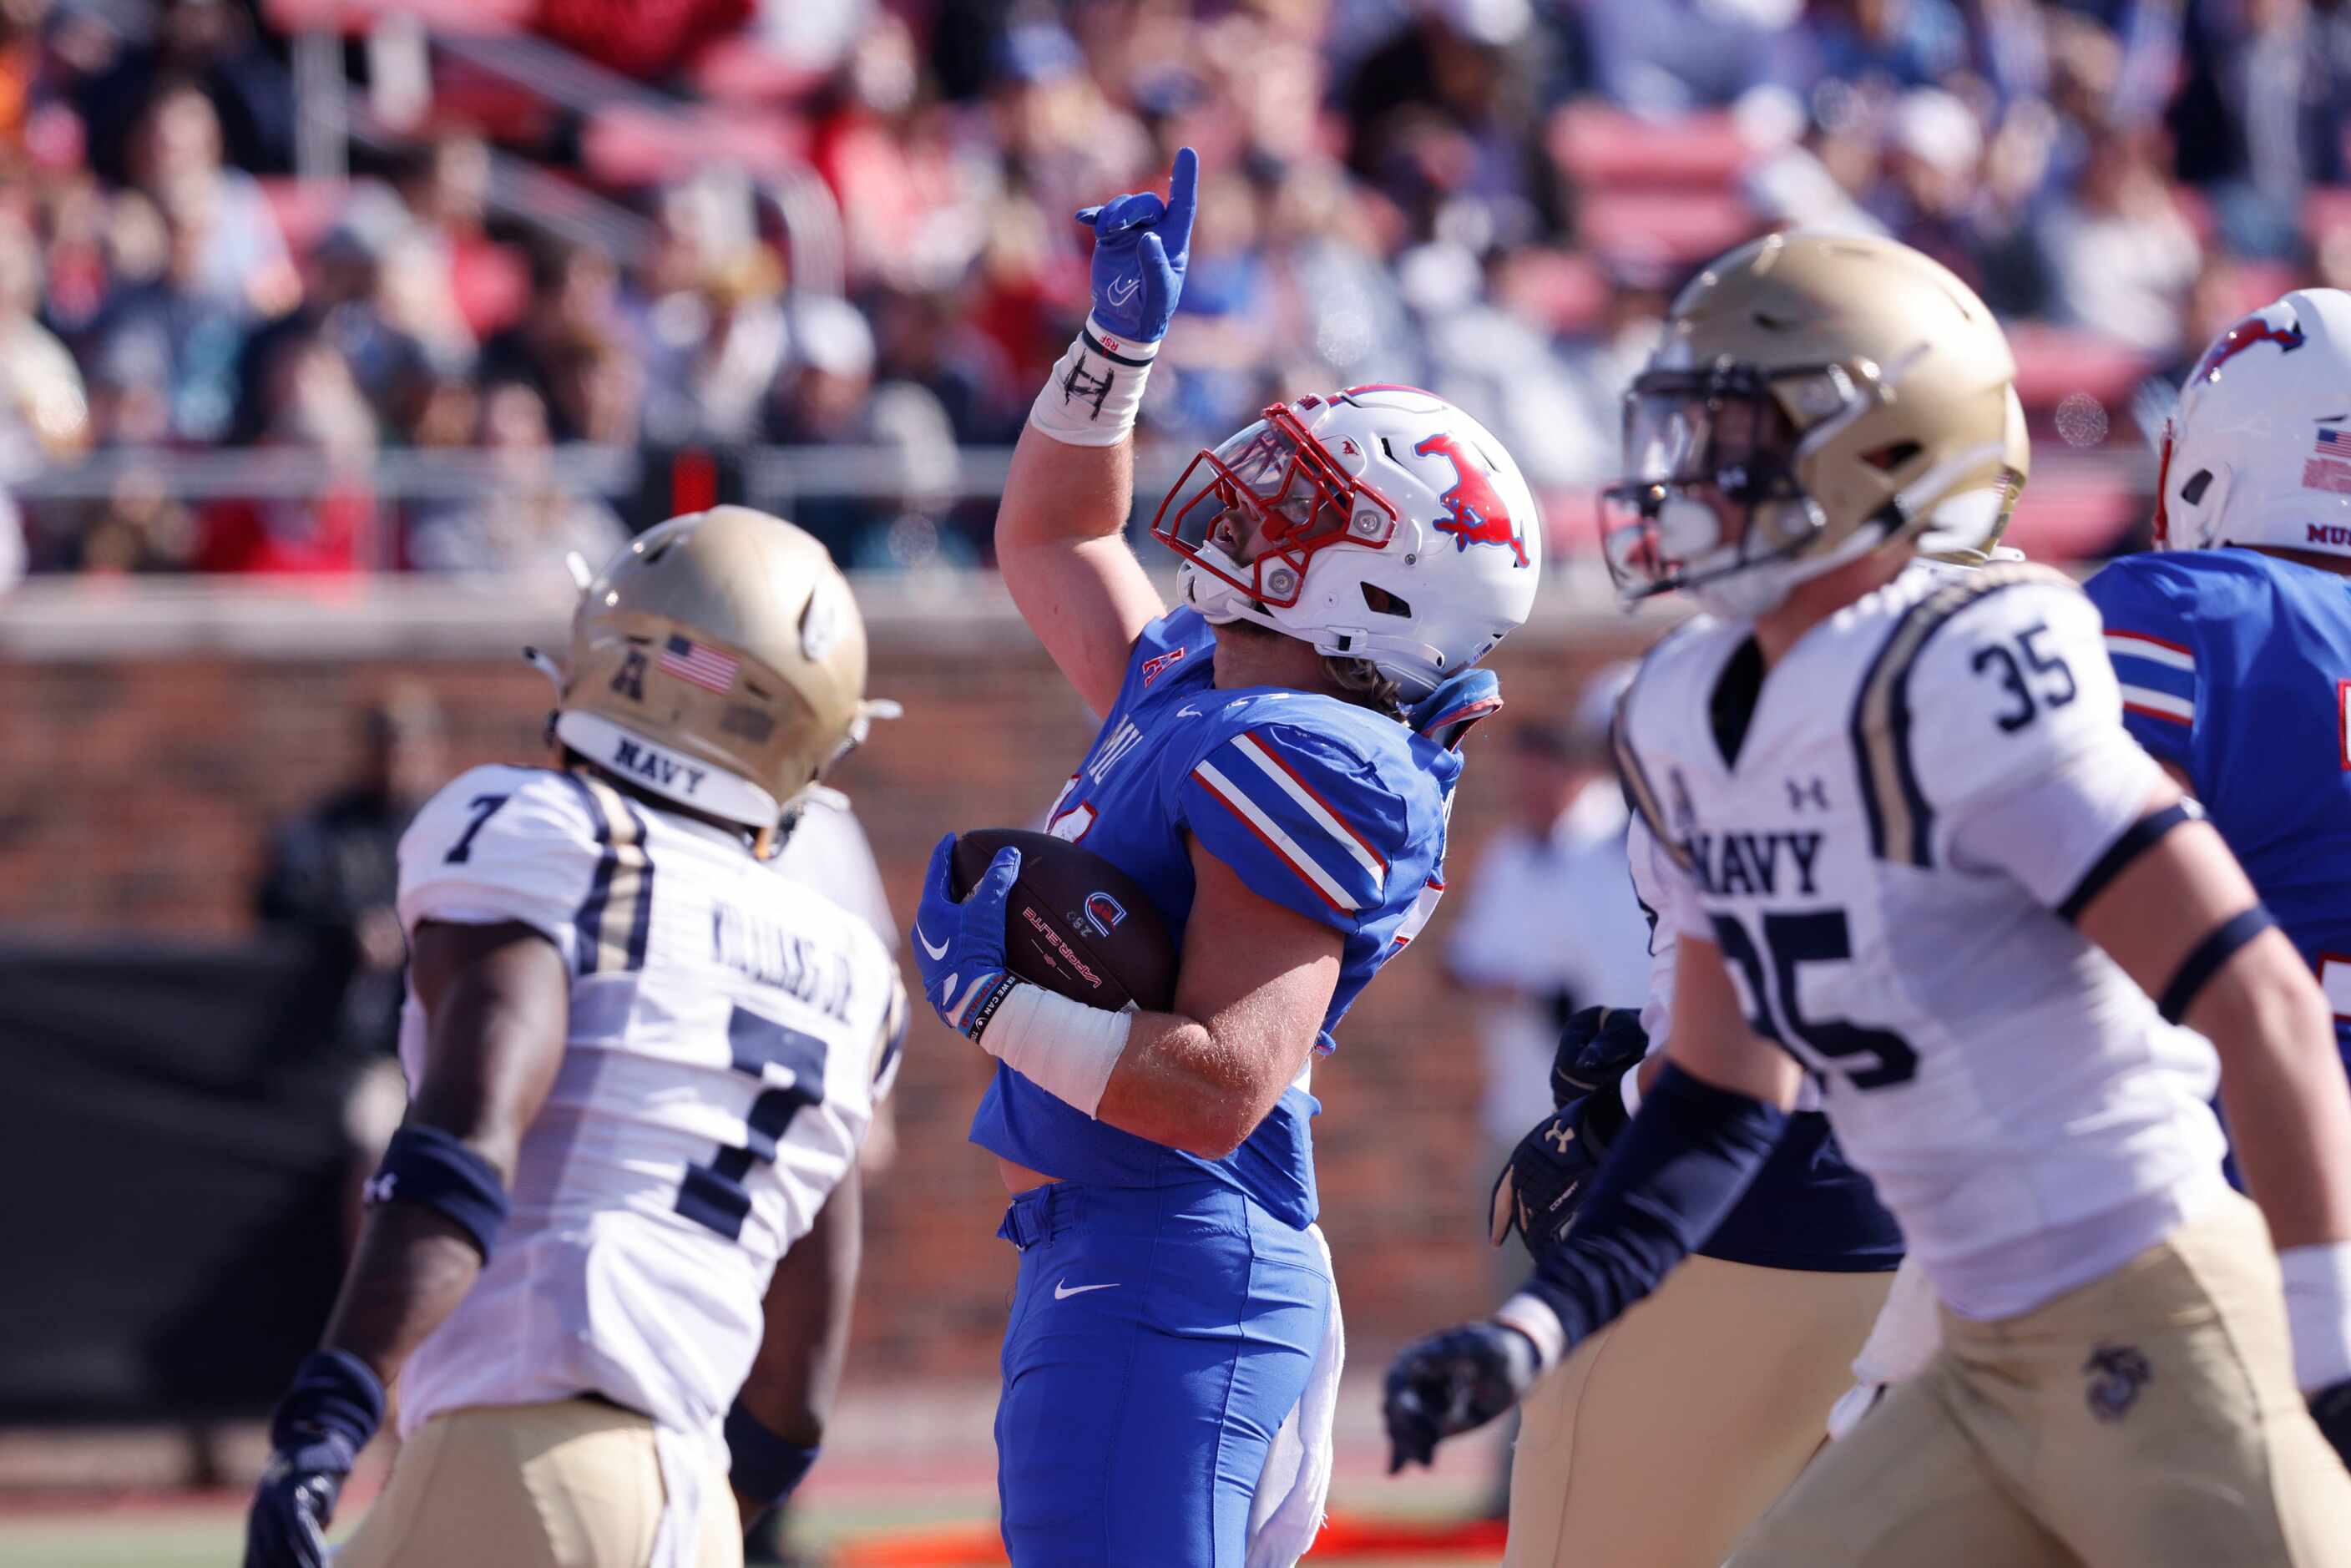 SMU running back Tyler Lavine (31) celebrates after he scored a touchdown against the Navy...